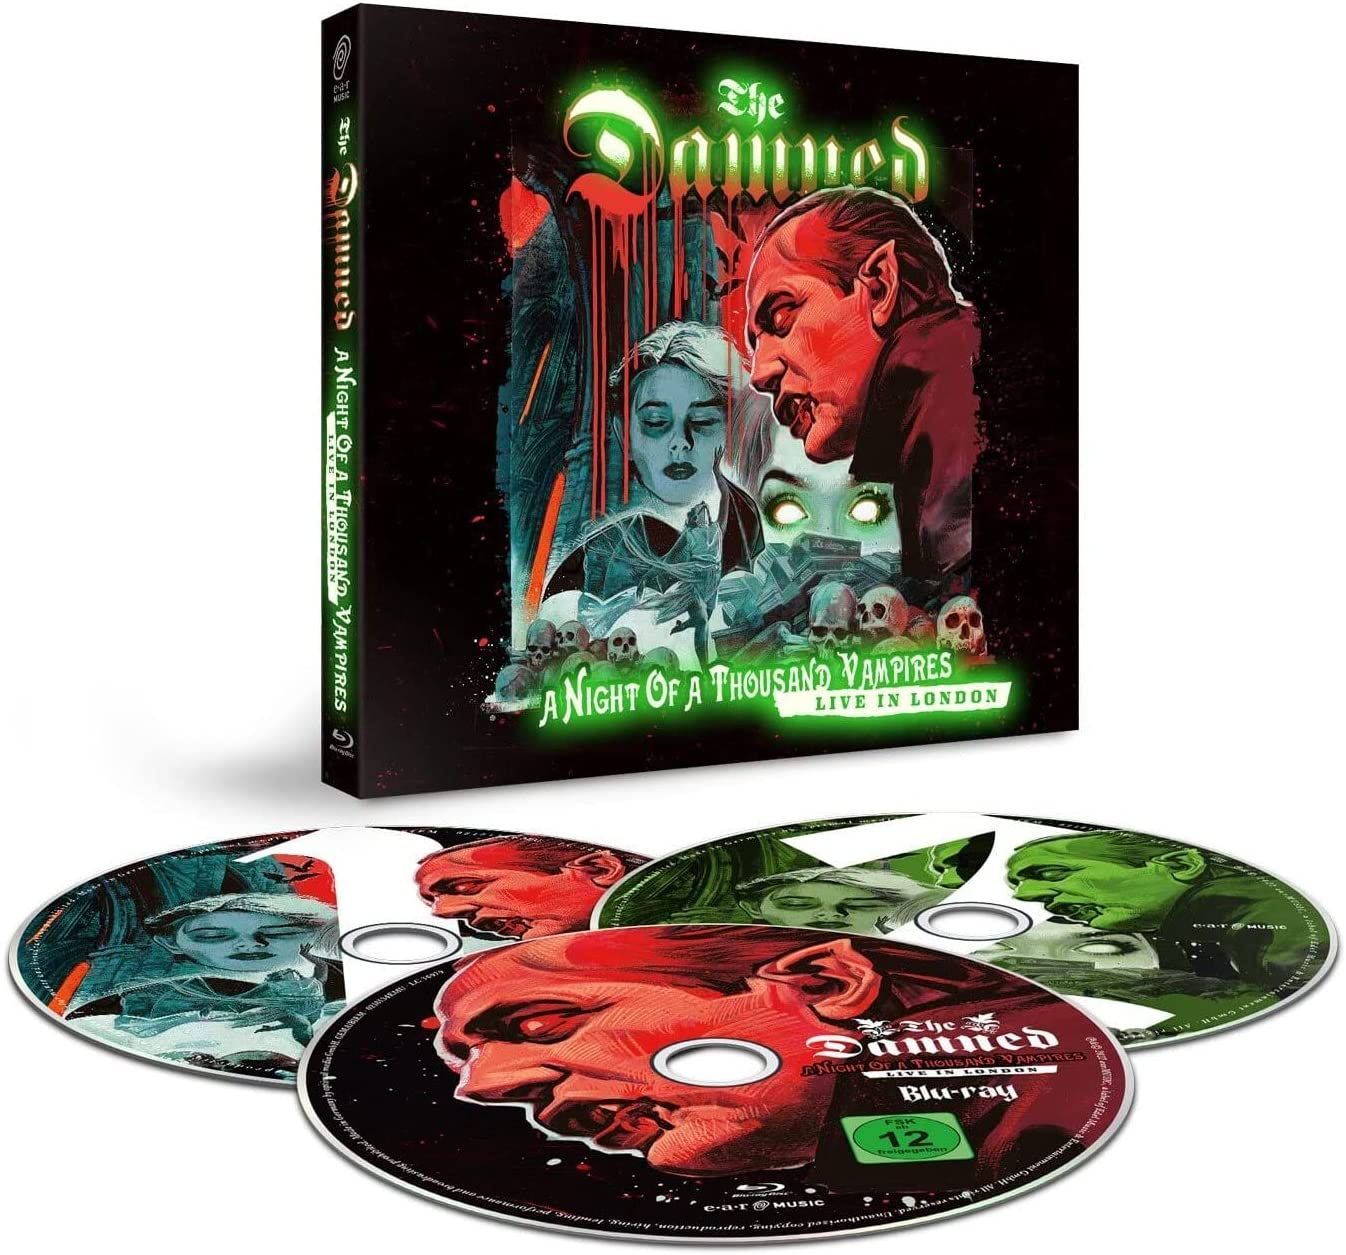 The Damned - A Night Of A Thousand Vampires - 2 CD/BluRay